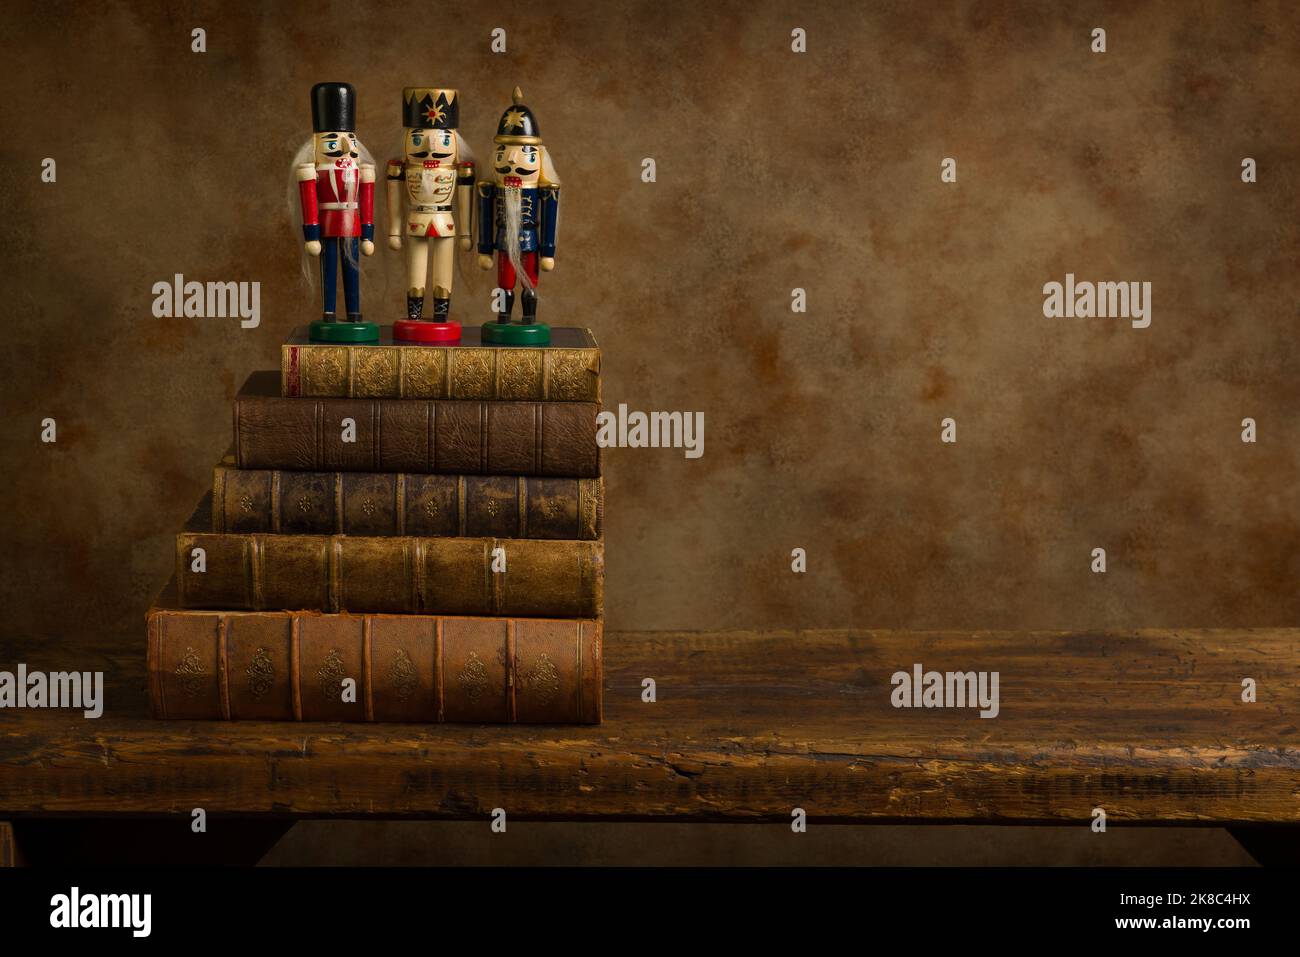 Three funny nutcracker puppets on old books on a rustic old wooden shelf. This is suitable for digital compositing. Stock Photo